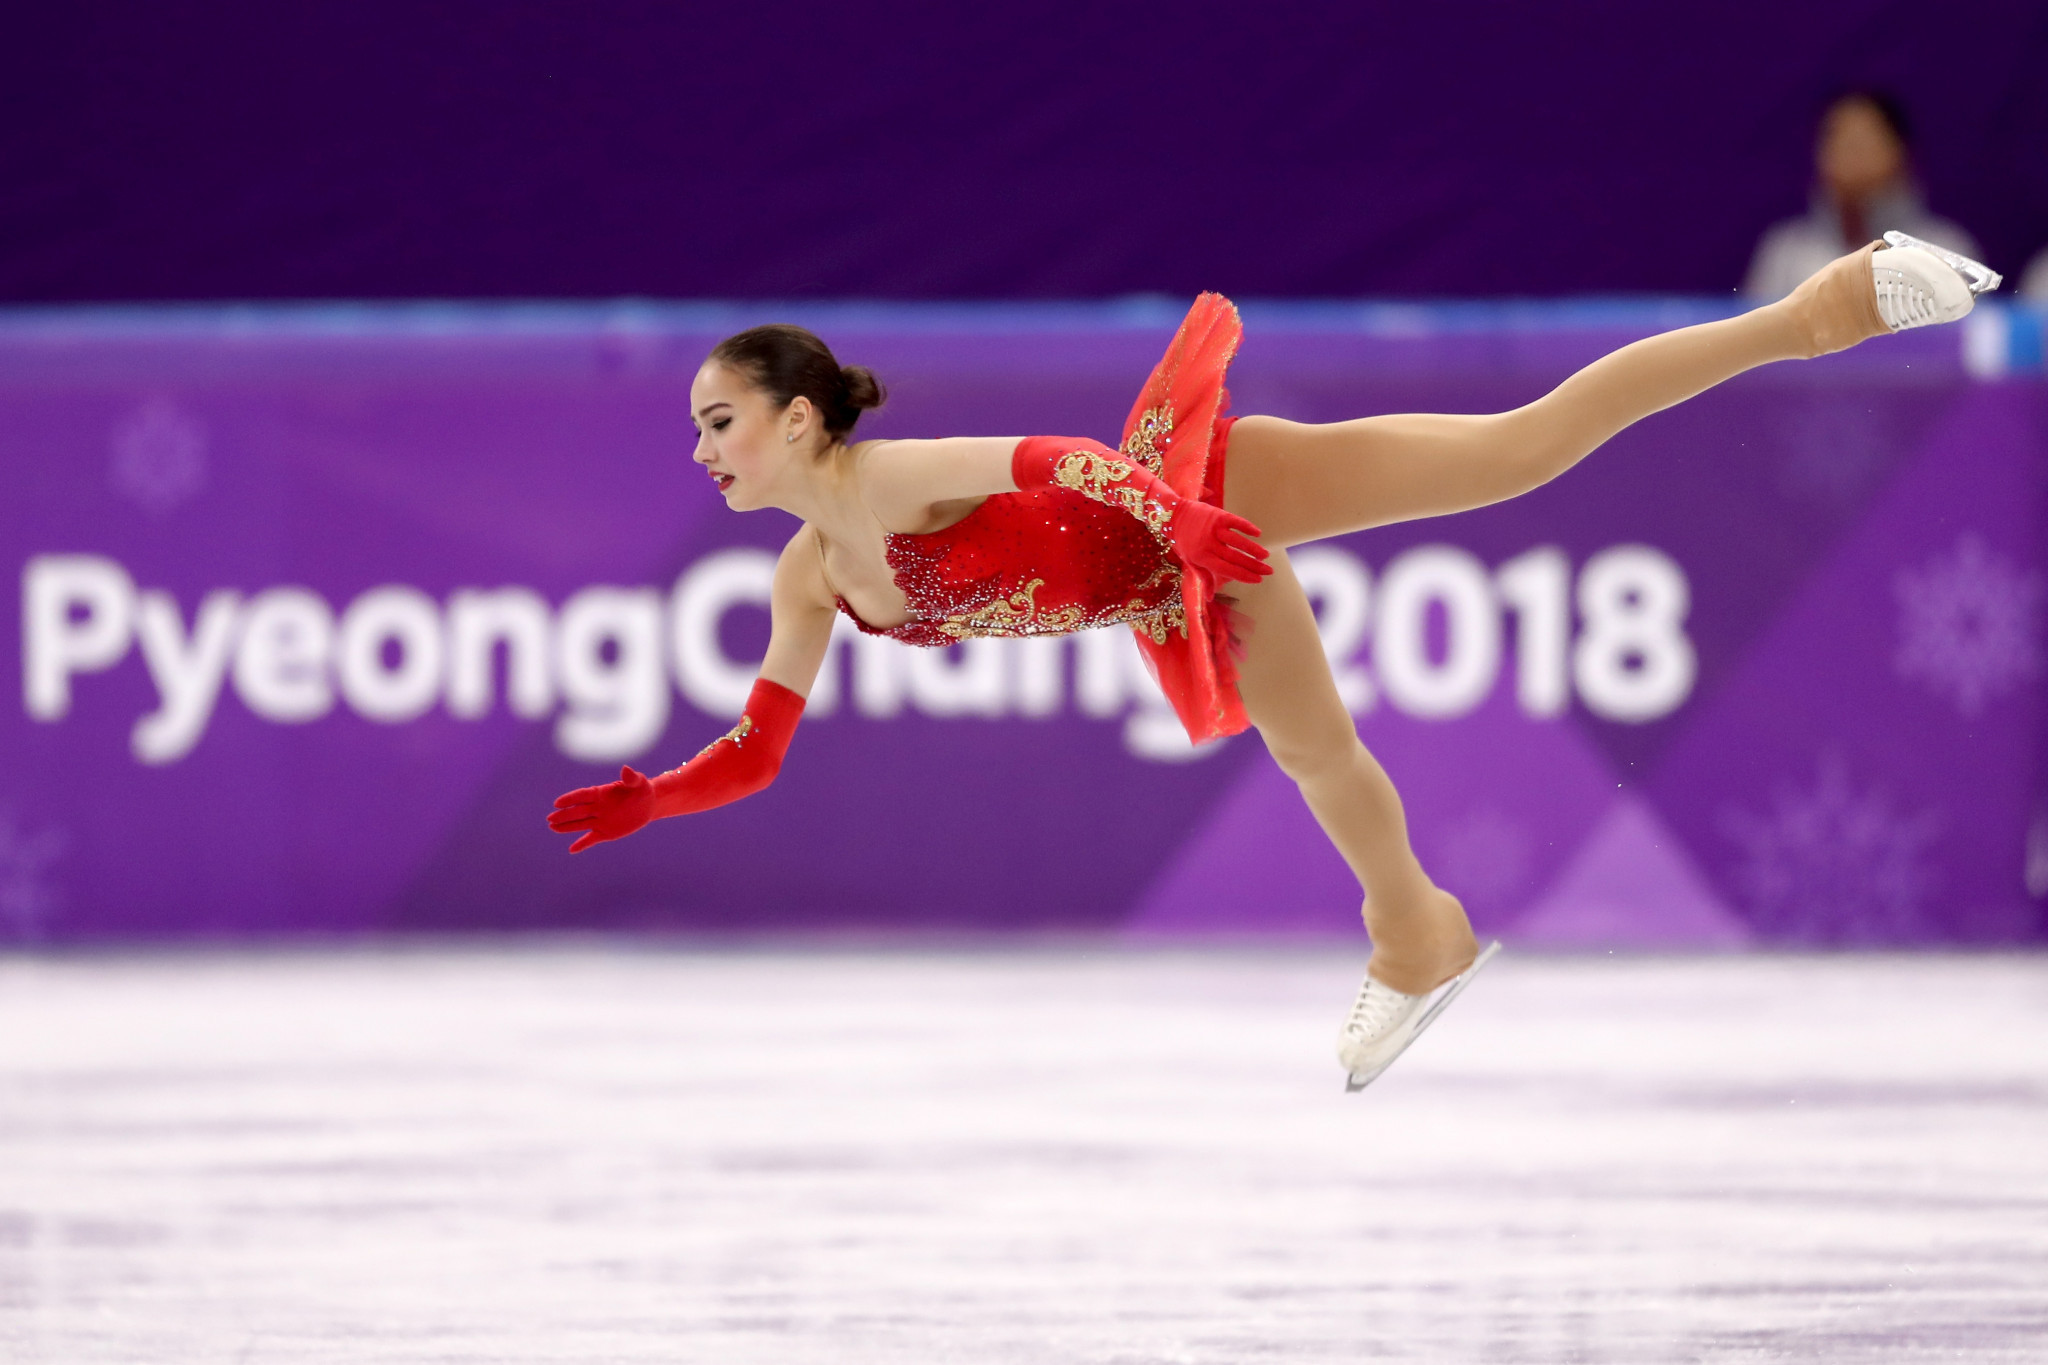 Dutch officials propose raising eligibility age for figure skaters to 17